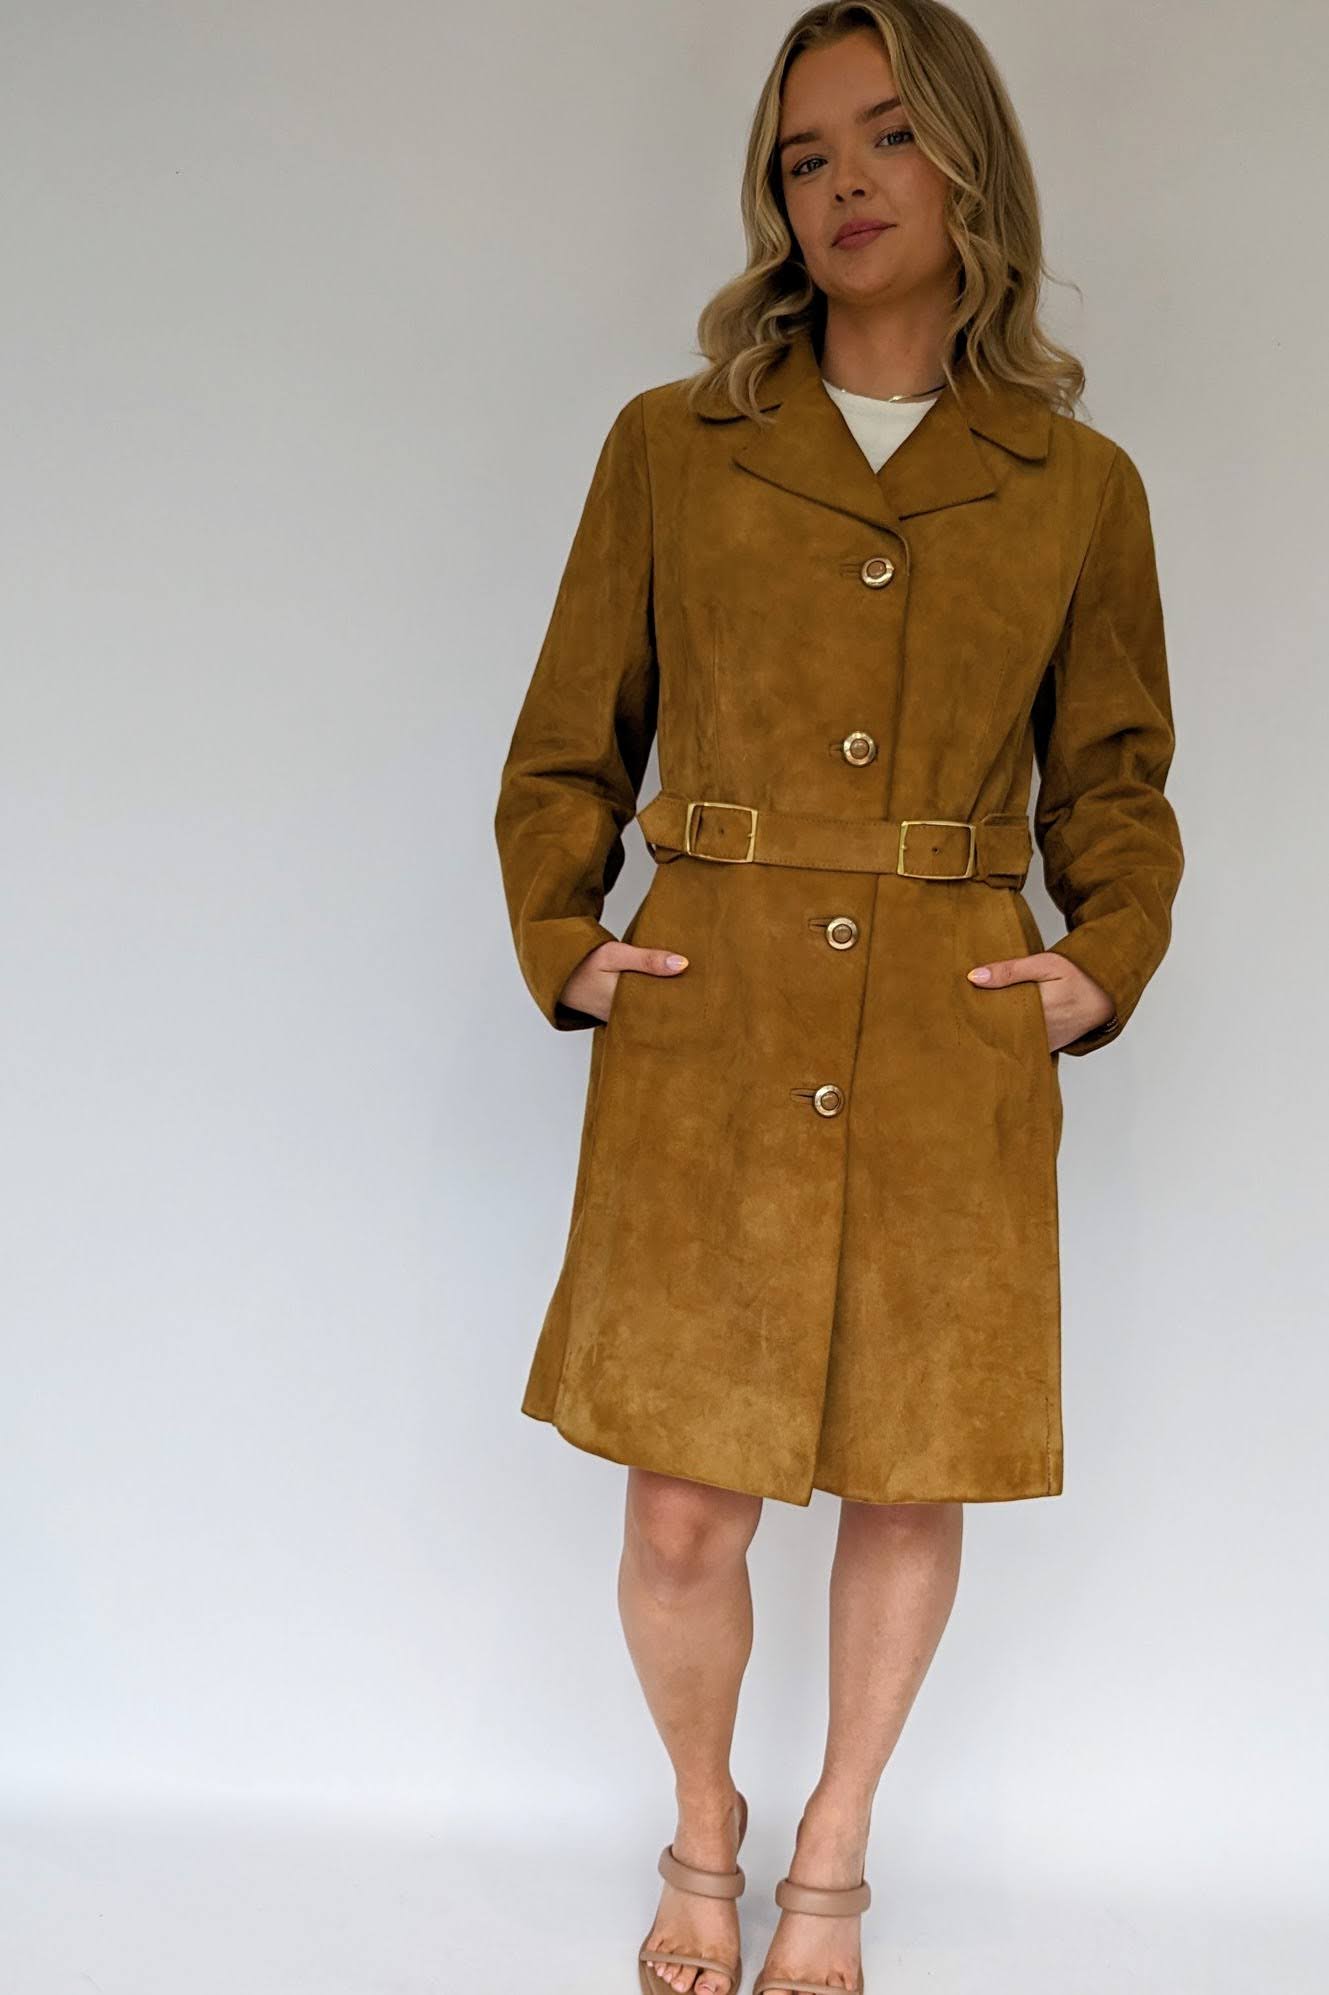 70s long tan suede ladies coat with gold buttons done up